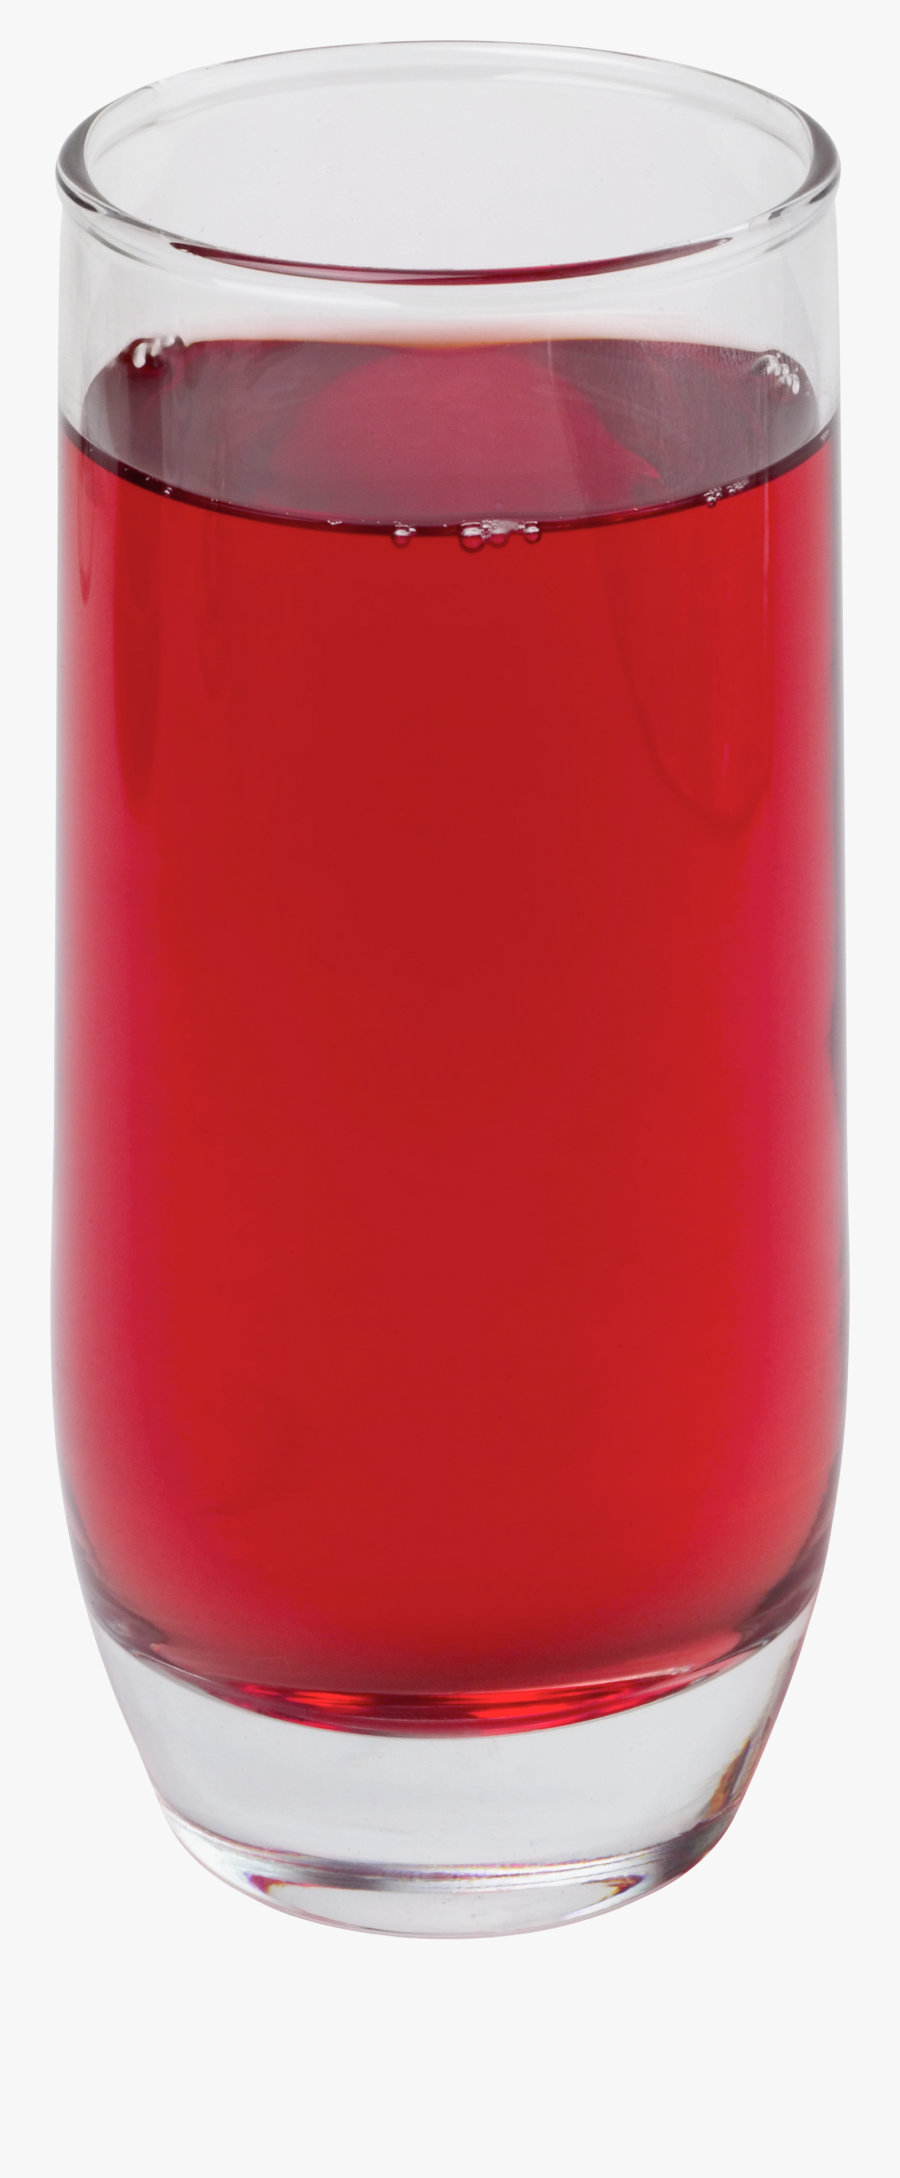 Juice Png Image - Glass Of Red Juice, Transparent Clipart